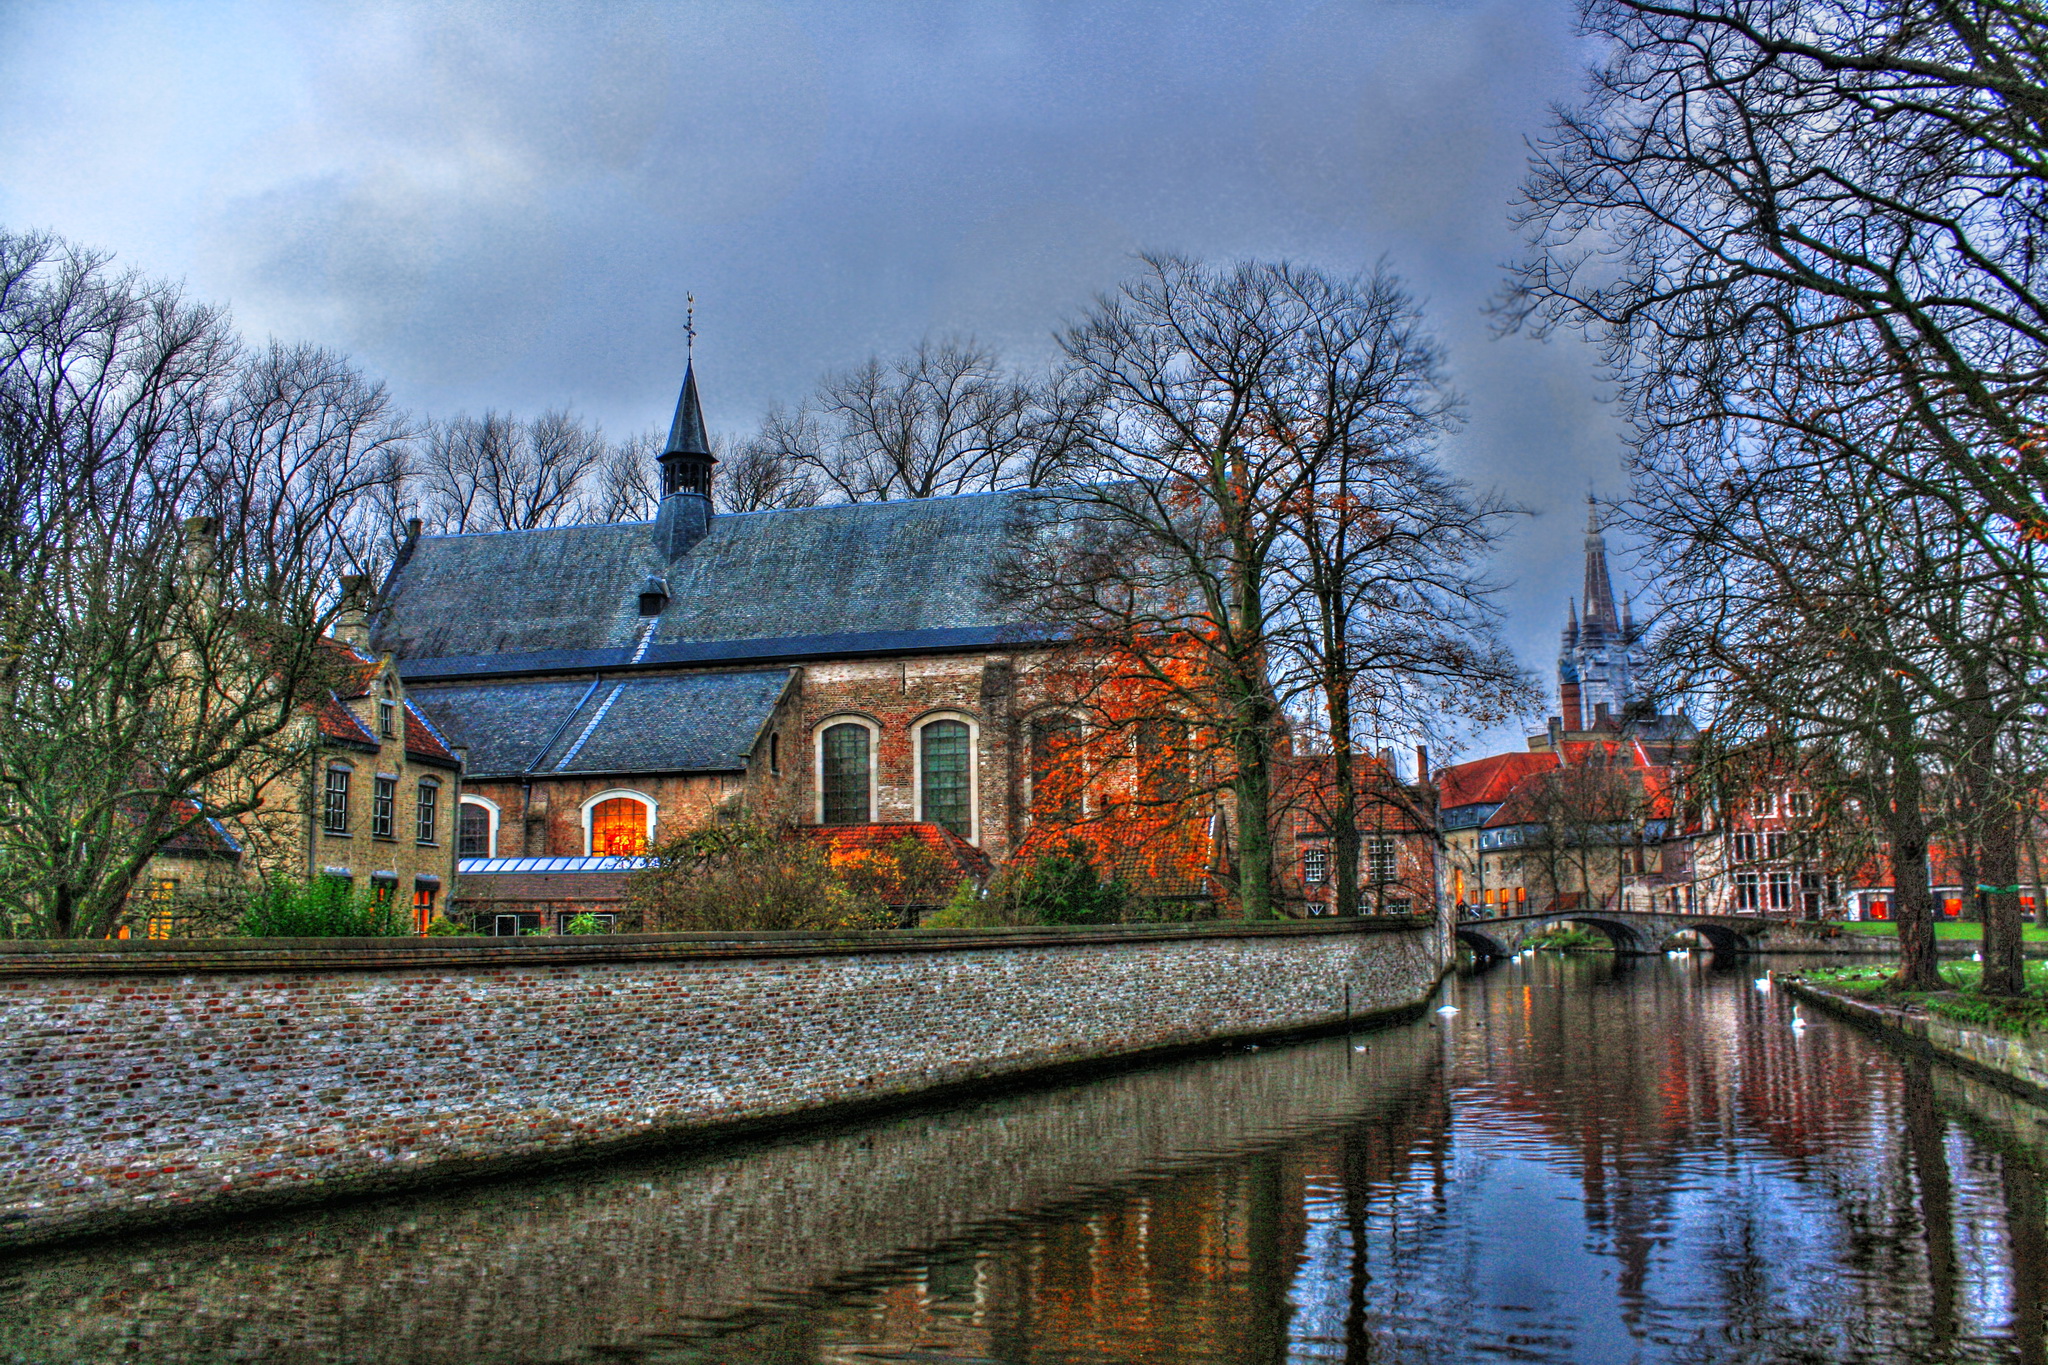 Mobile wallpaper photography, hdr, belgium, brugge, canal, church, man made, religious, tree